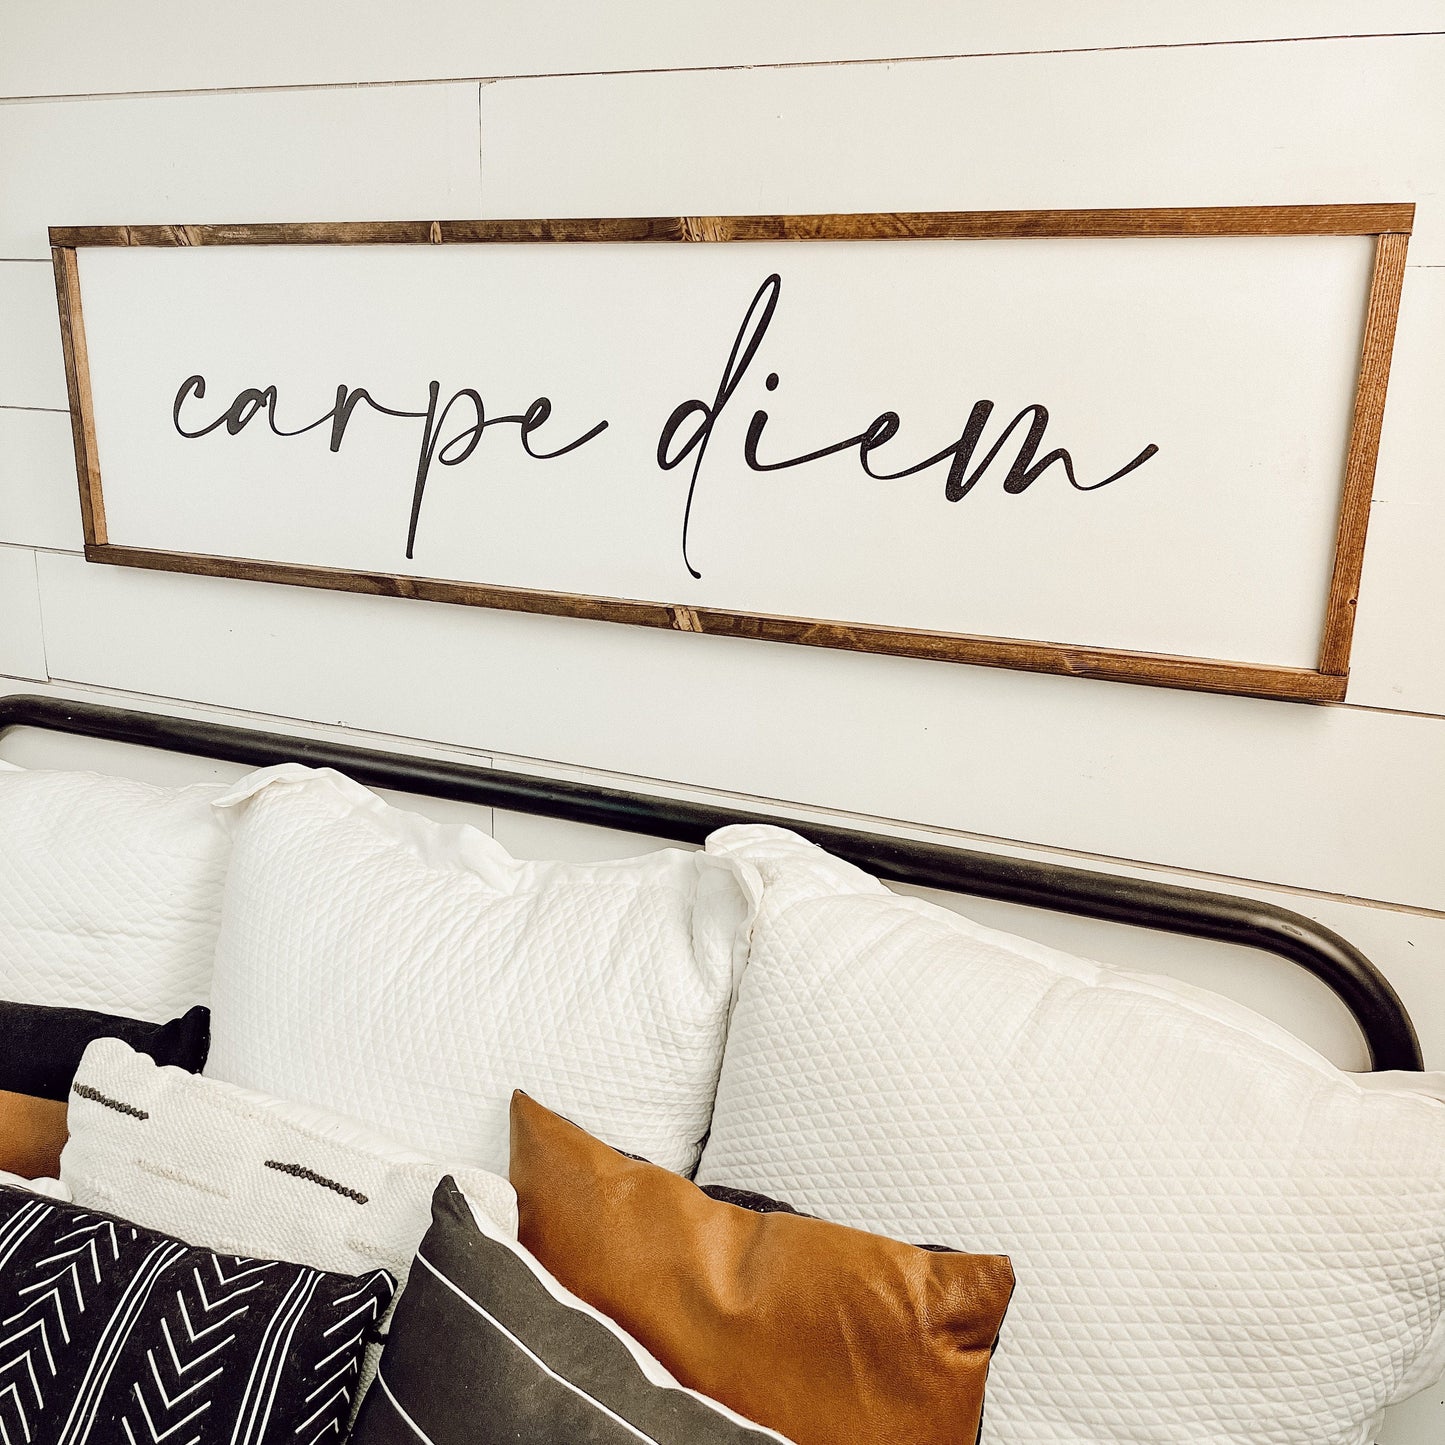 carpe diem - above over the bed sign - master bedroom wall art [FREE SHIPPING!]